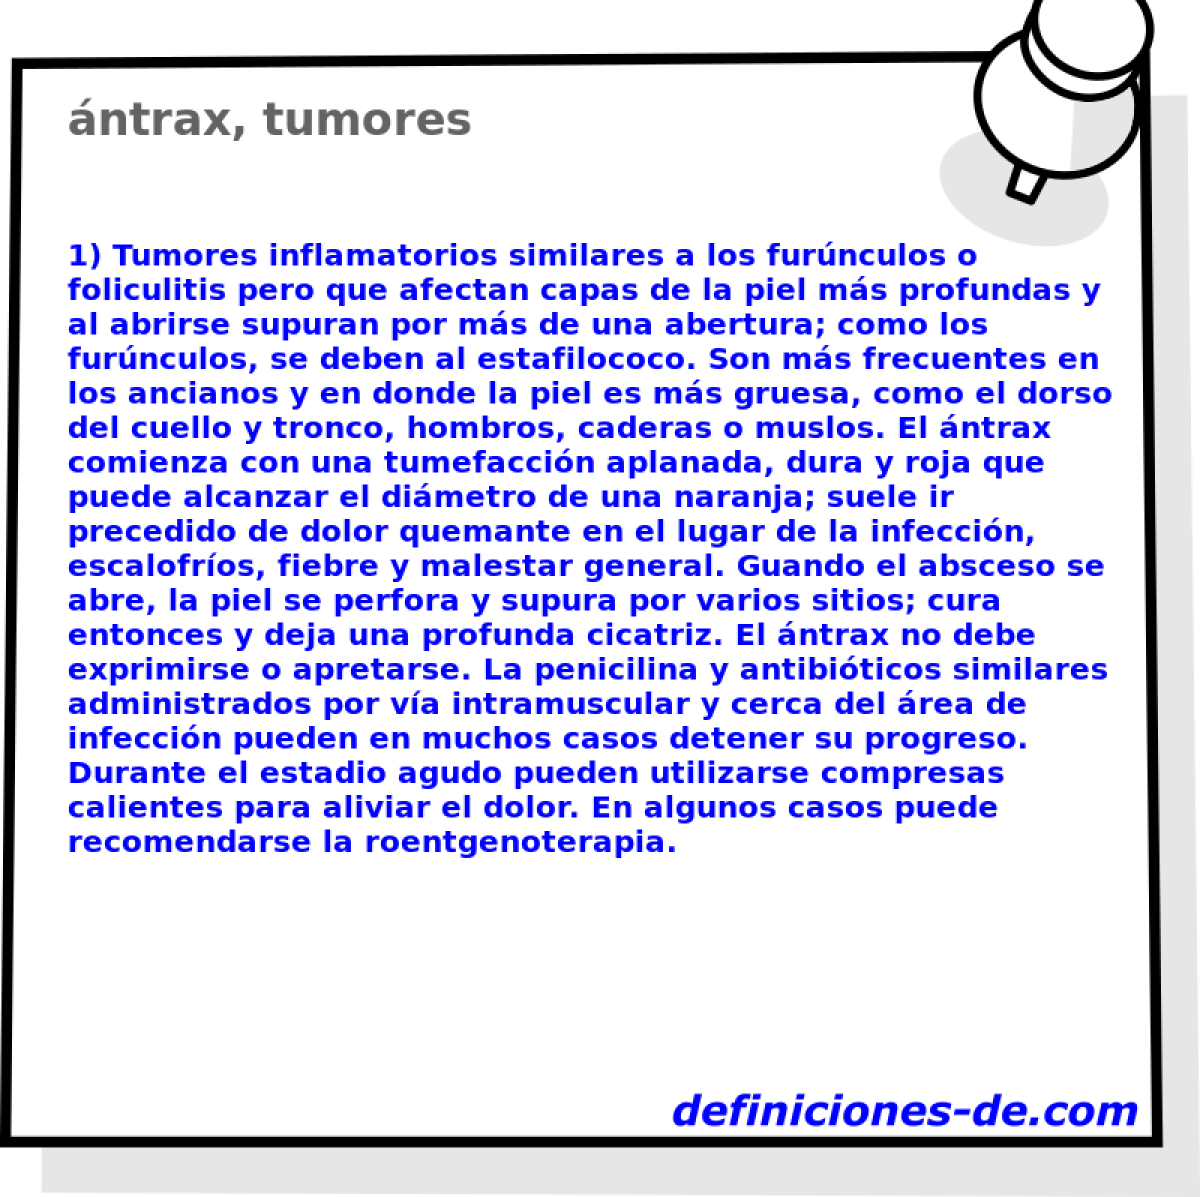 ntrax, tumores 